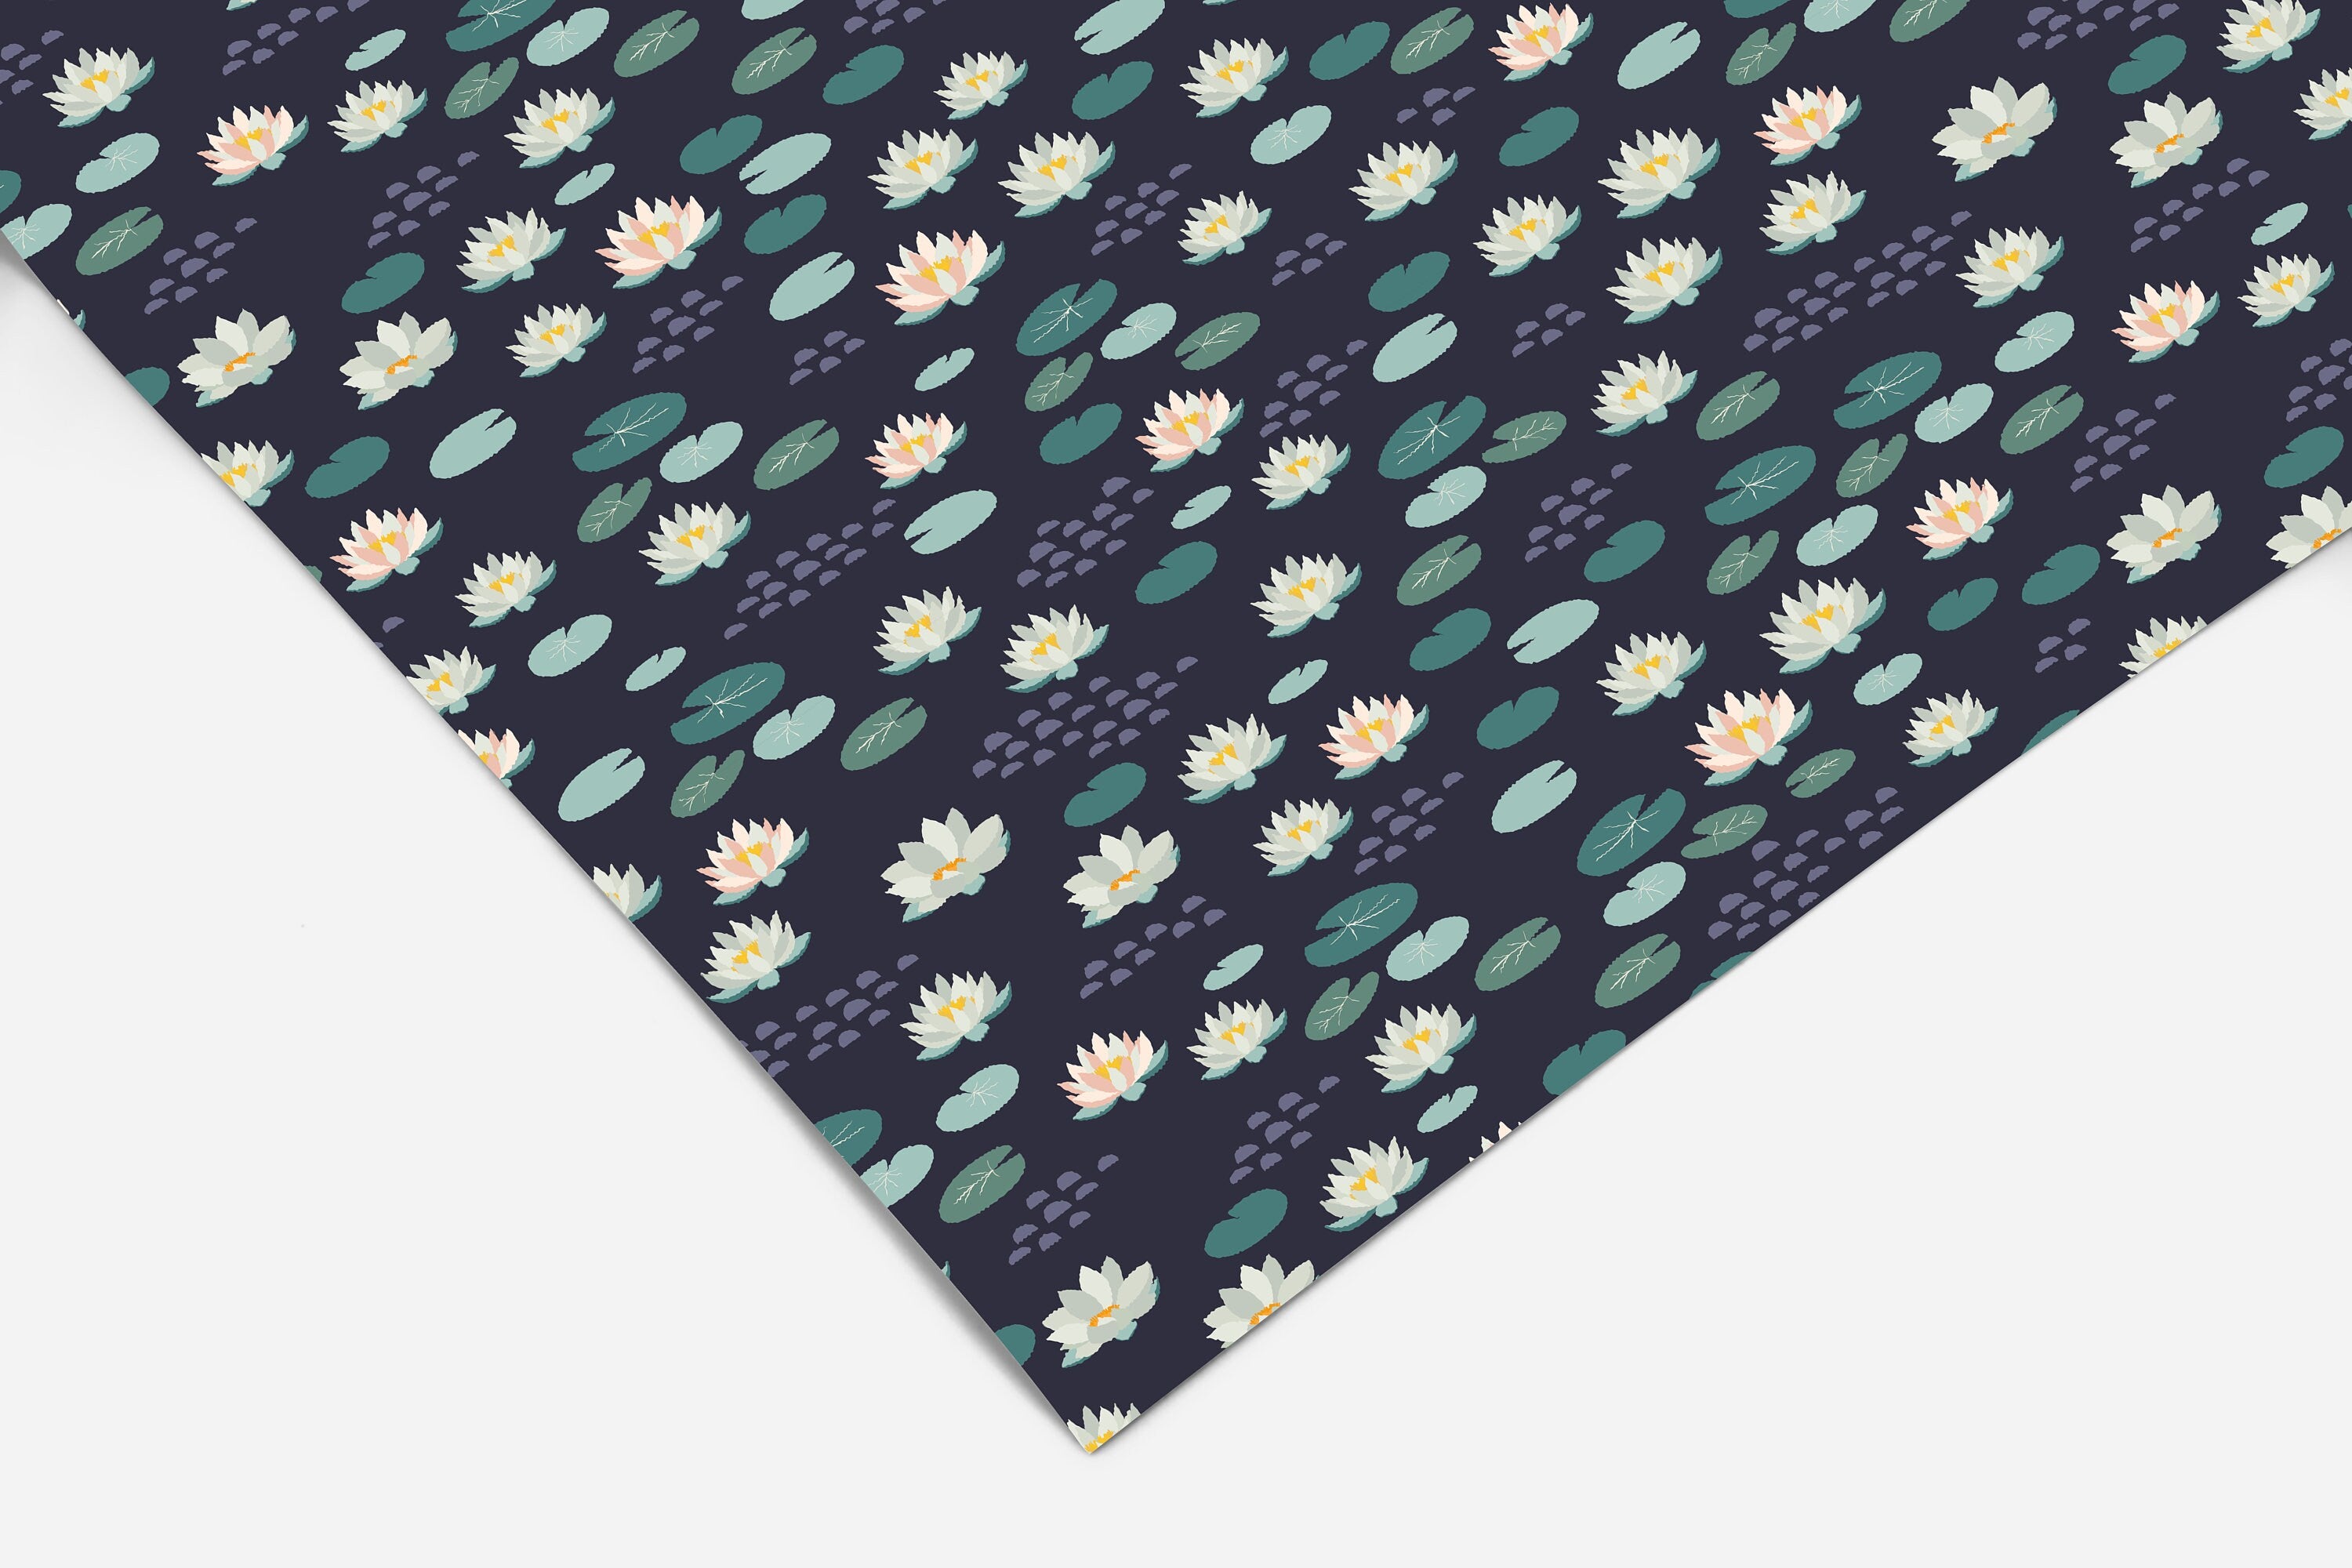 Lily Pad Bathroom Contact Paper Peel And Stick Wallpaper | Removable Wallpaper | Shelf Liner | Drawer Liner | Peel and Stick Paper 180 - JamesAndColors